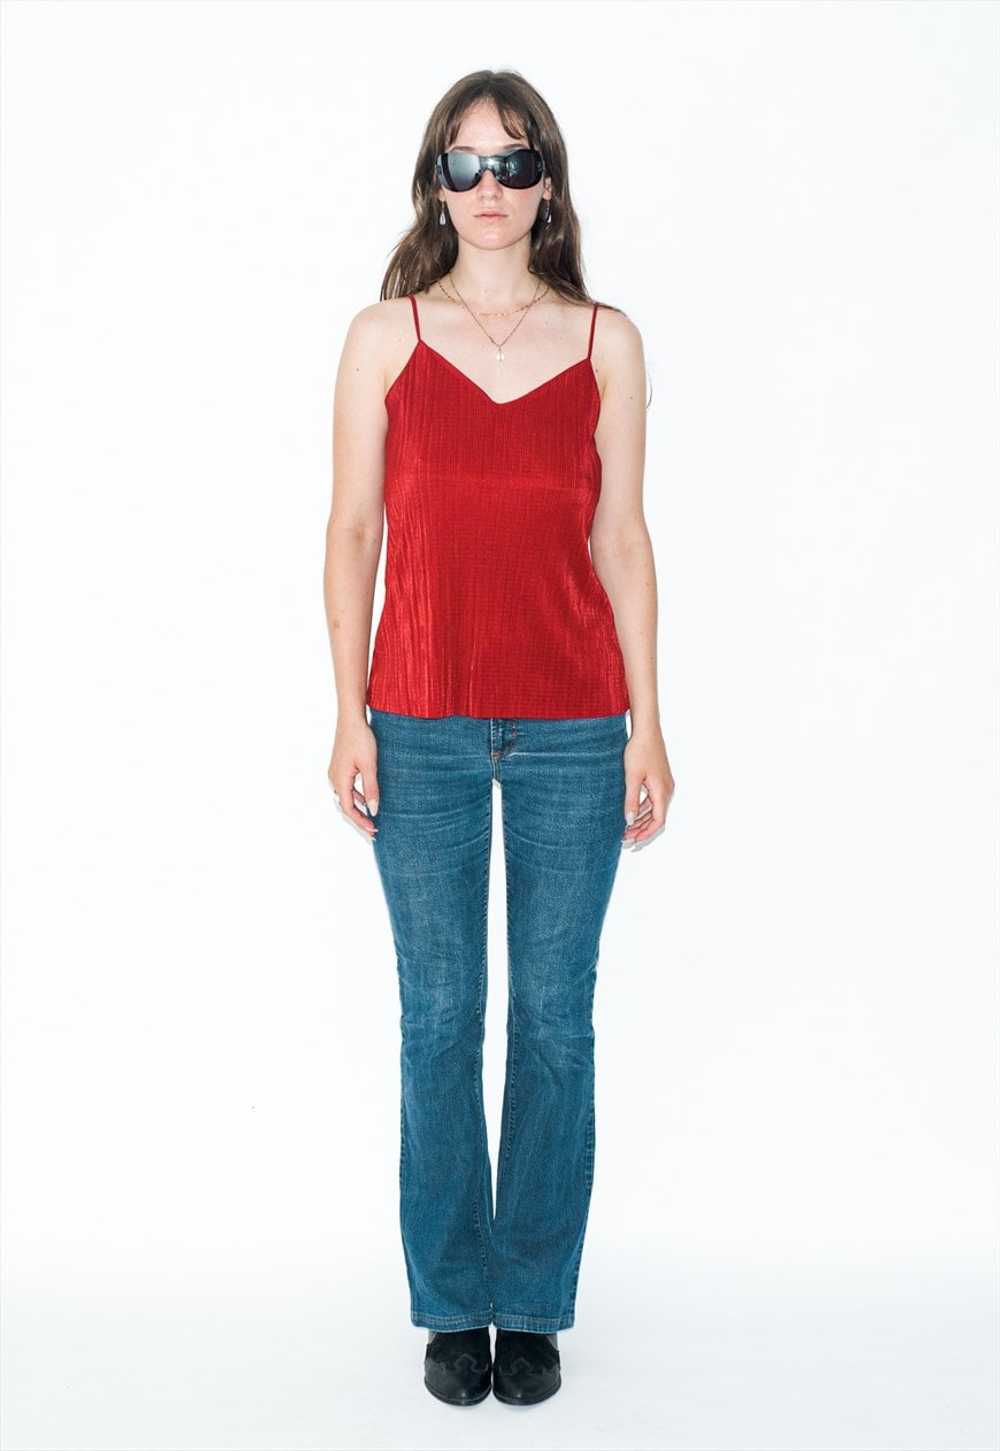 Vintage 90s stretchy cute sleeve-less top in red - image 5